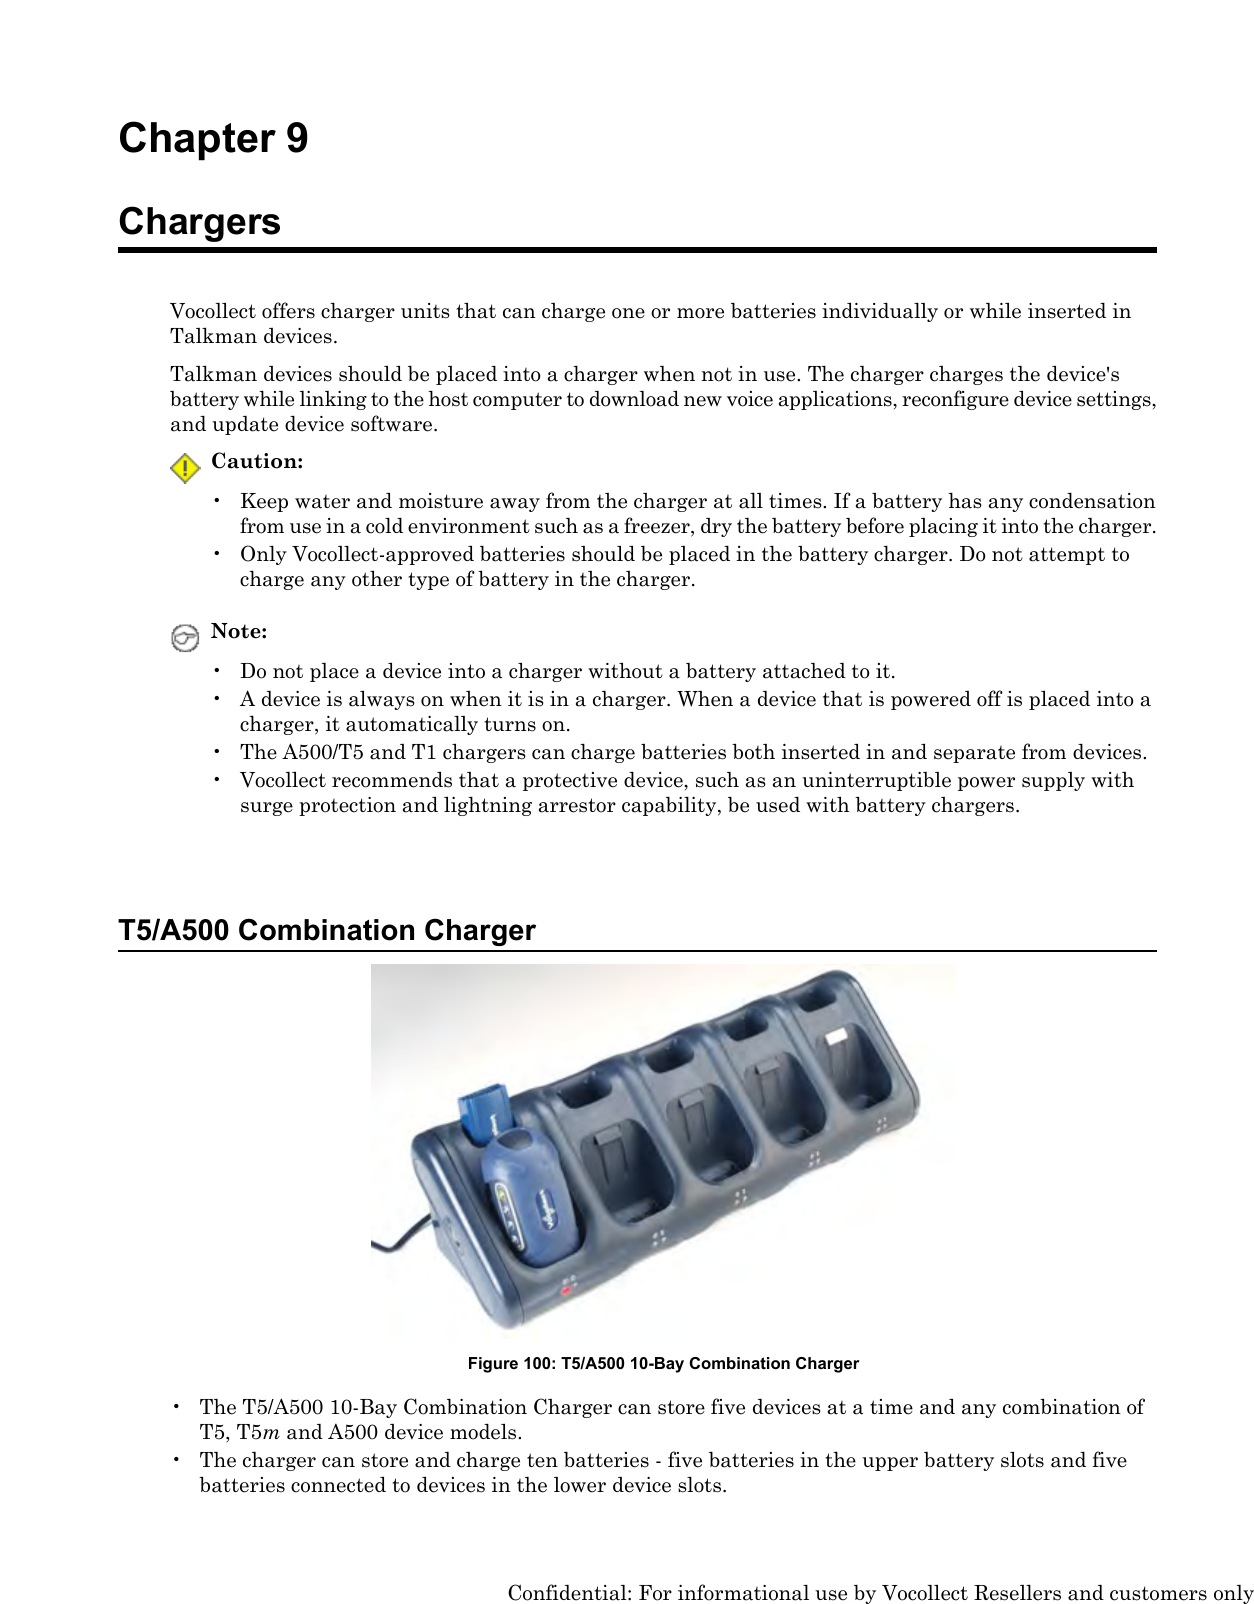 Chapter 9ChargersVocollect offers charger units that can charge one or more batteries individually or while inserted inTalkman devices.Talkman devices should be placed into a charger when not in use. The charger charges the device&apos;sbattery while linking to the host computer to download new voice applications, reconfigure device settings,and update device software.Caution:• Keep water and moisture away from the charger at all times. If a battery has any condensationfrom use in a cold environment such as a freezer, dry the battery before placing it into the charger.• Only Vocollect-approved batteries should be placed in the battery charger. Do not attempt tocharge any other type of battery in the charger.Note:• Do not place a device into a charger without a battery attached to it.• A device is always on when it is in a charger. When a device that is powered off is placed into acharger, it automatically turns on.• The A500/T5 and T1 chargers can charge batteries both inserted in and separate from devices.• Vocollect recommends that a protective device, such as an uninterruptible power supply withsurge protection and lightning arrestor capability, be used with battery chargers.T5/A500 Combination ChargerFigure 100: T5/A500 10-Bay Combination Charger• The T5/A500 10-Bay Combination Charger can store five devices at a time and any combination ofT5, T5mand A500 device models.• The charger can store and charge ten batteries - five batteries in the upper battery slots and fivebatteries connected to devices in the lower device slots.Confidential: For informational use by Vocollect Resellers and customers only